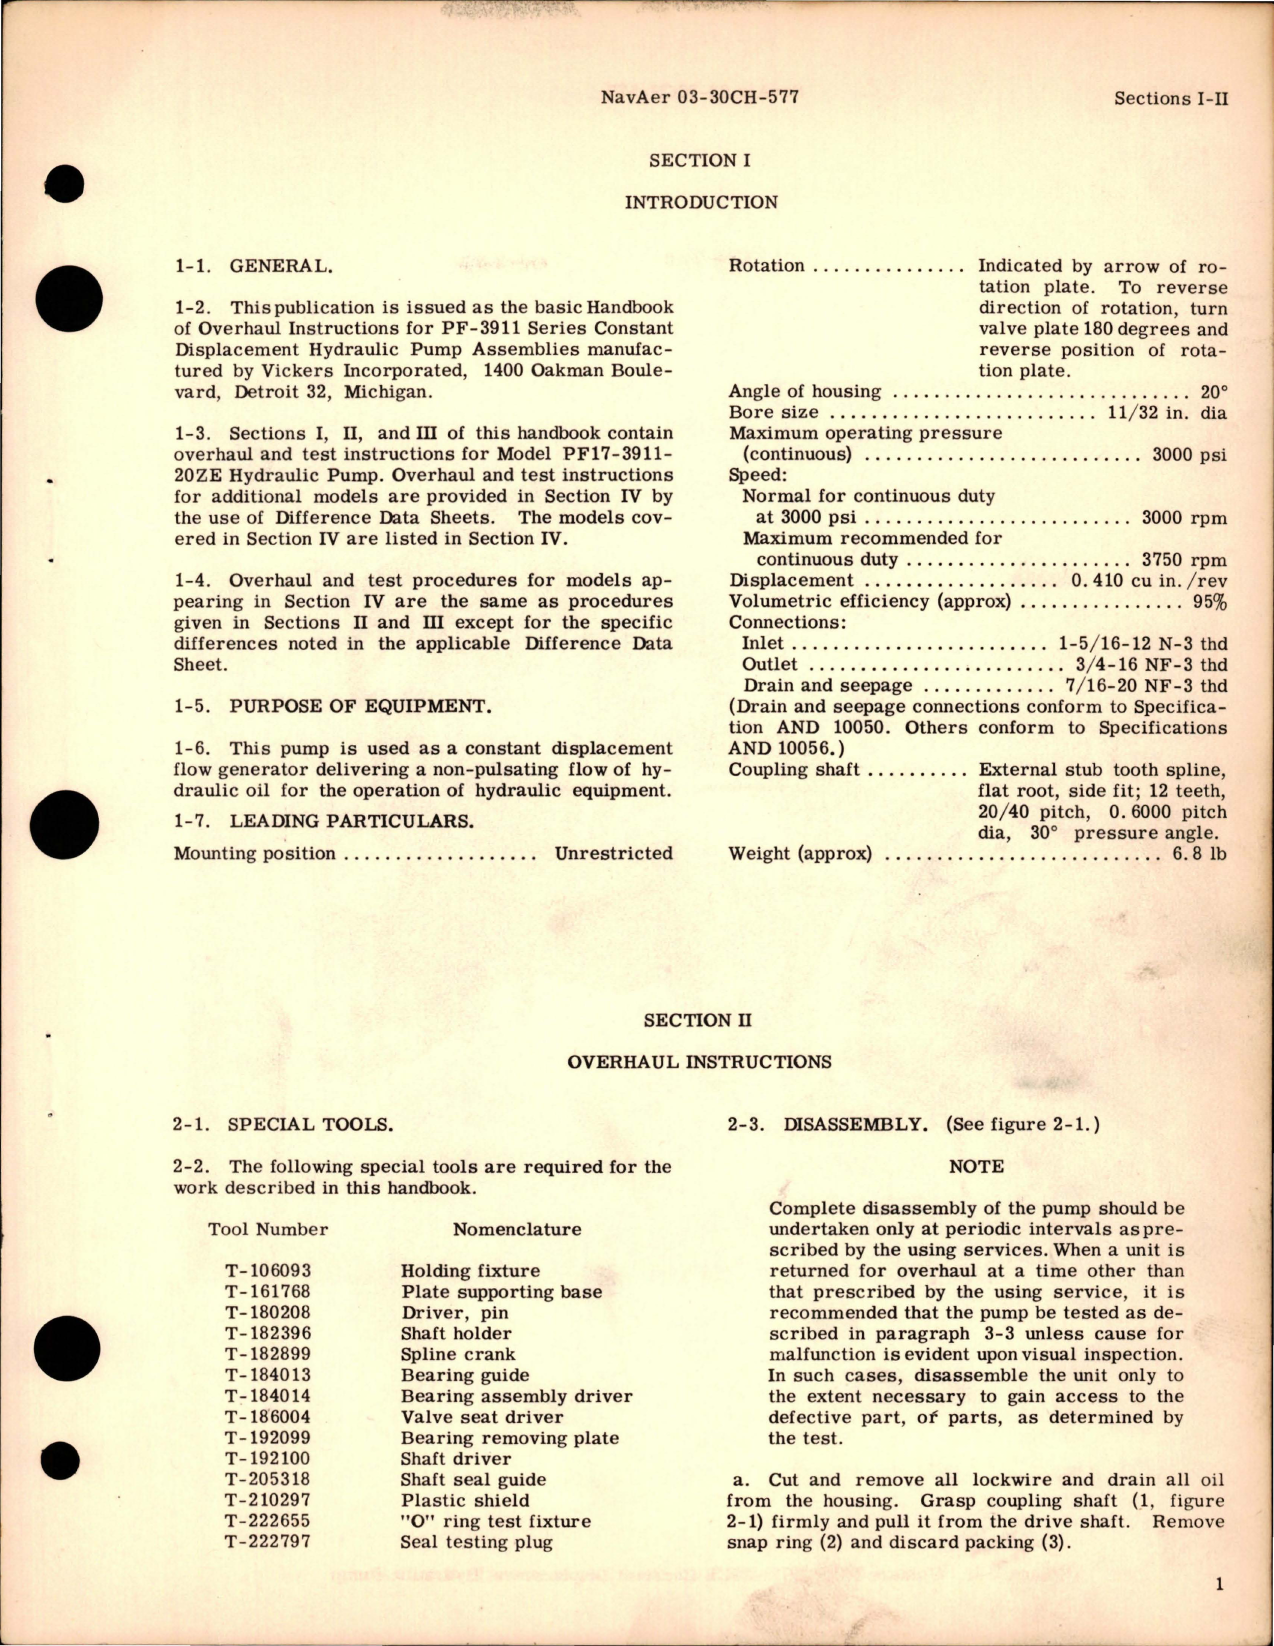 Sample page 5 from AirCorps Library document: Overhaul Instructions for Constant Displacement Hydraulic Pump Assemblies